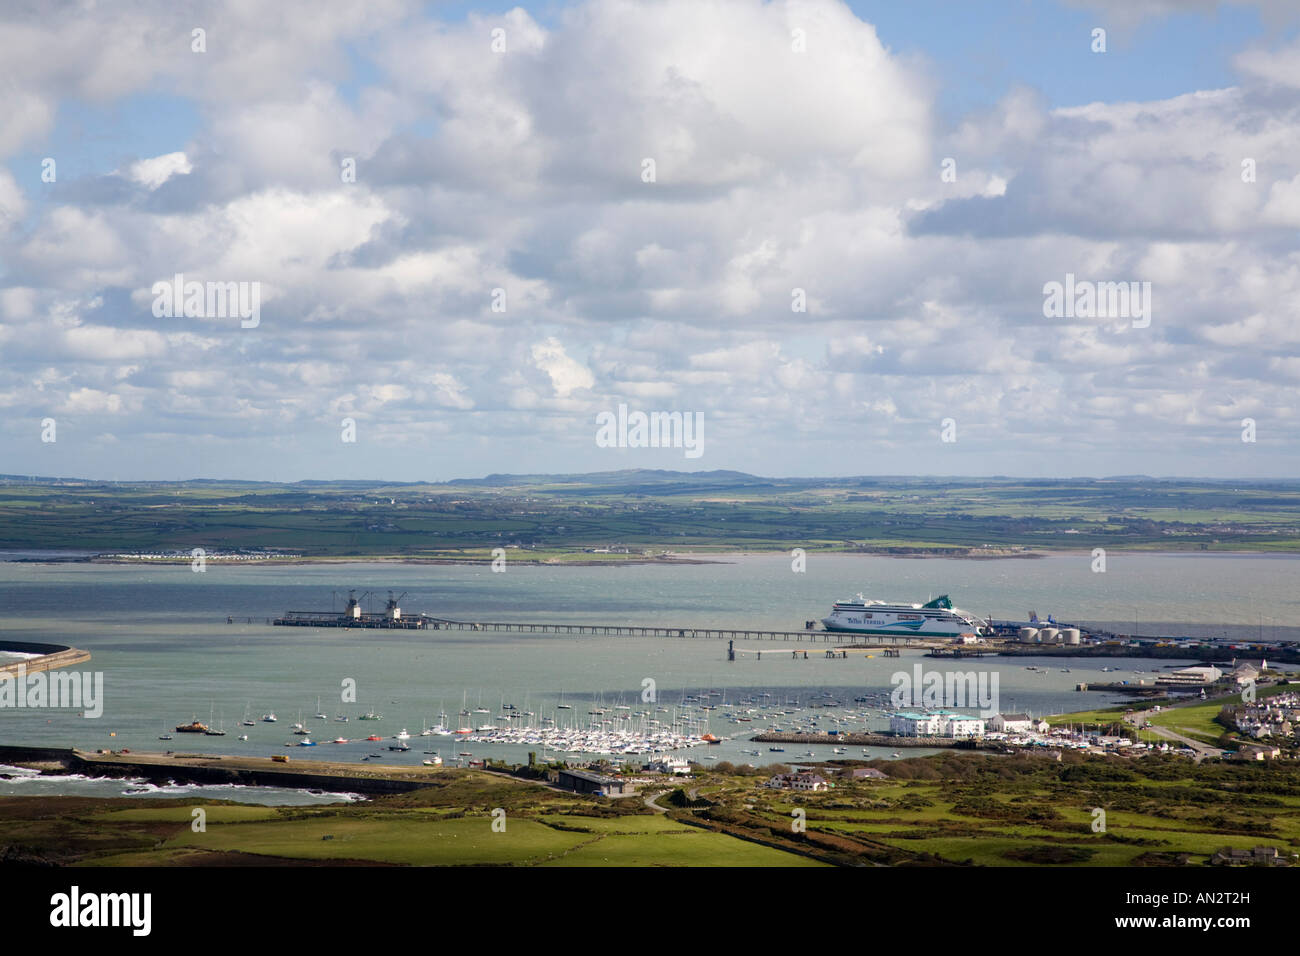 Elevated view of New harbour pier Irish Ferry terminal and coastline from Holyhead Mountain Holy Island Isle of Anglesey North Wales UK Britain Stock Photo